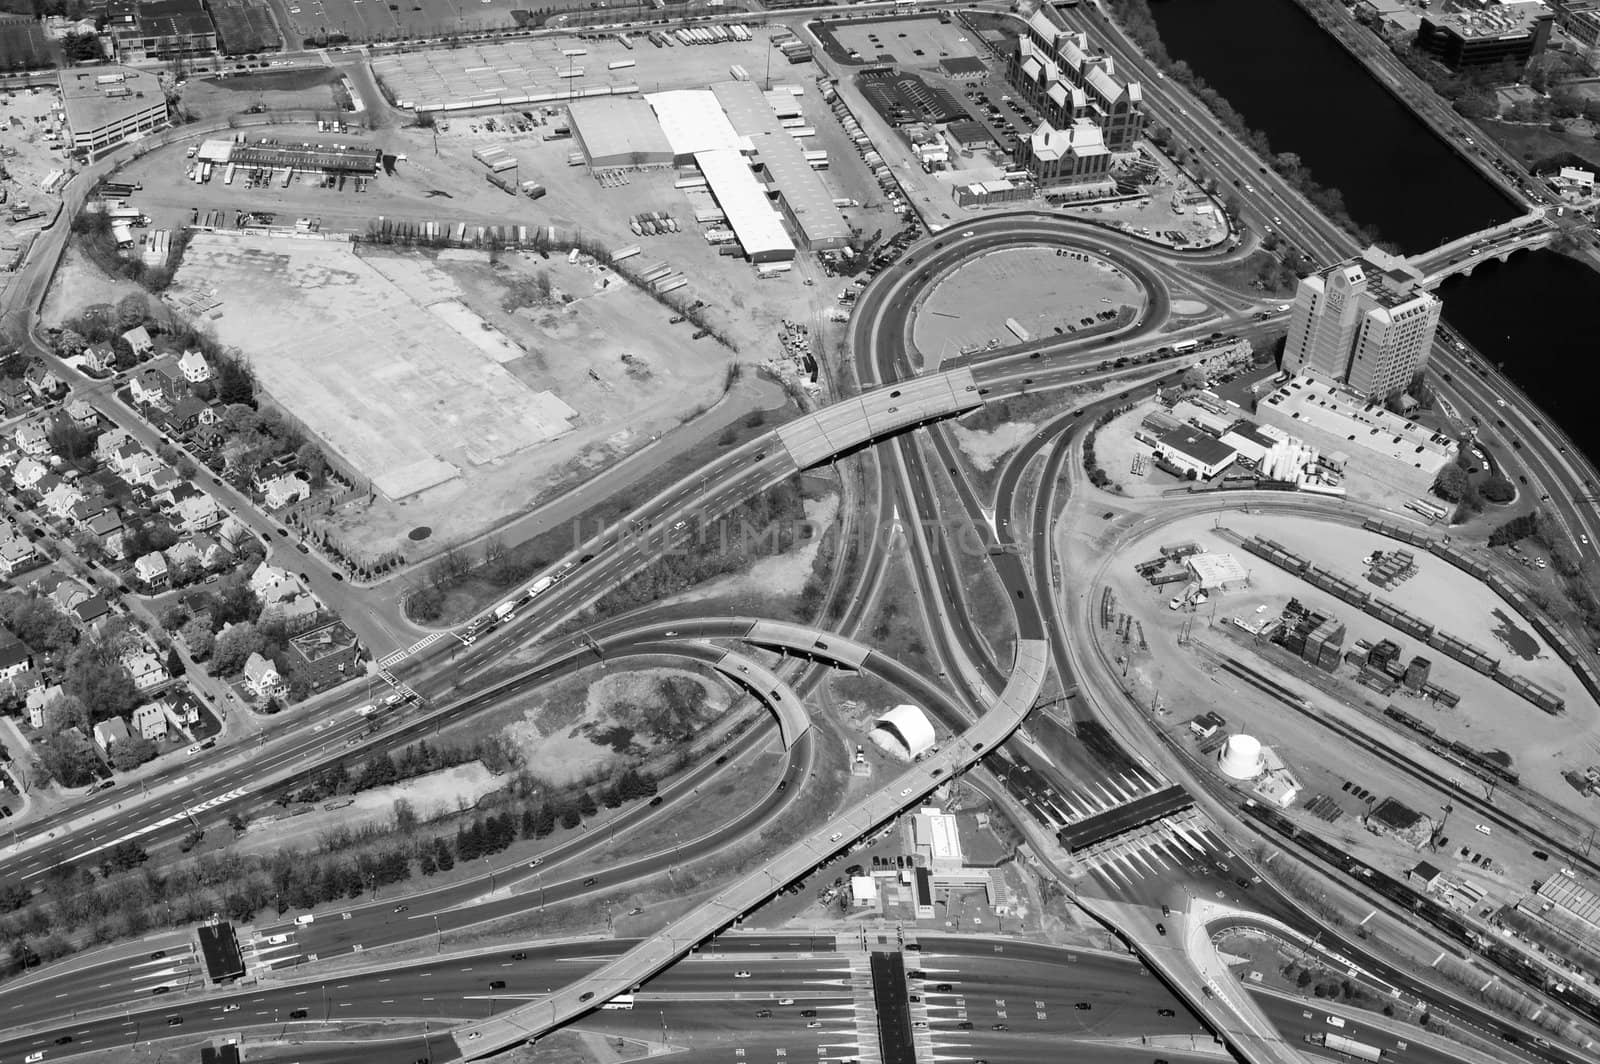 Aerial view of Massachusetts Turnpike tollbooths and interchange